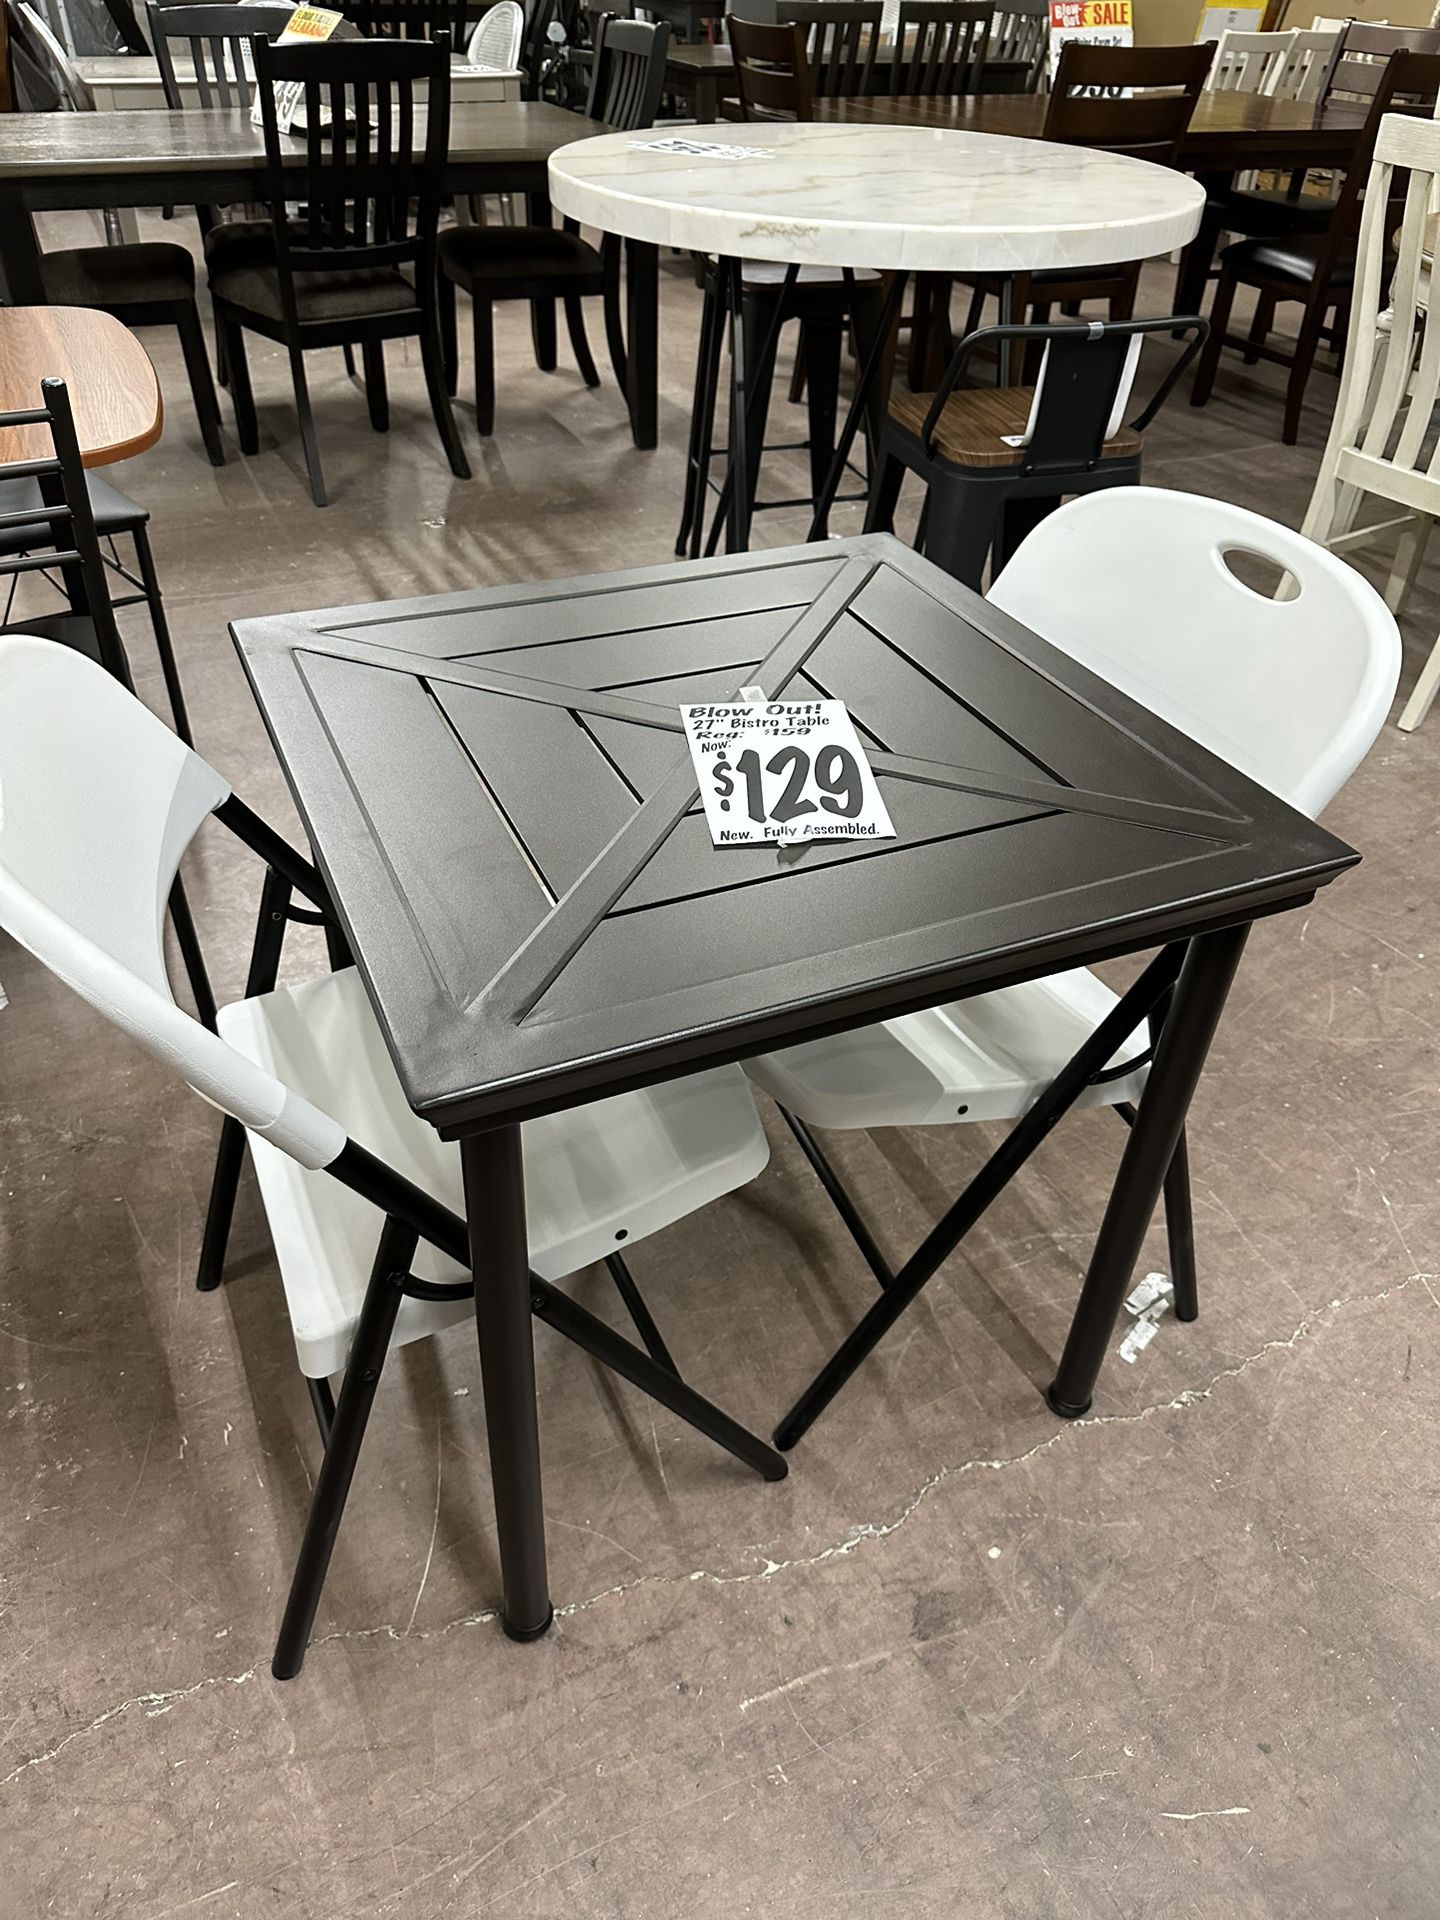 SALE!  BRAND NEW 3pc. 27” Square Bistro Dinette Set With Black Table & White & Black Chairs